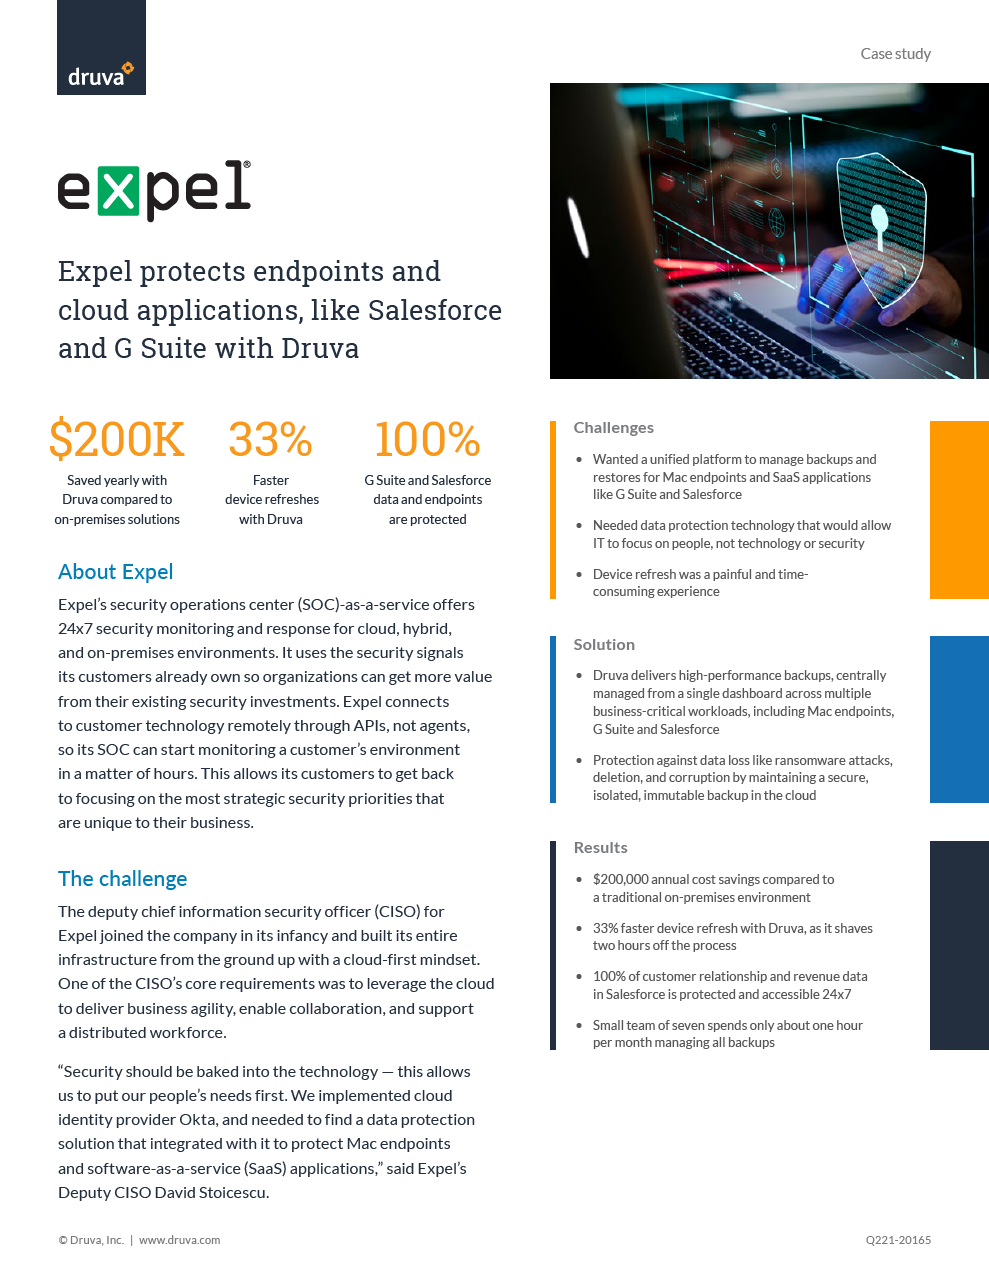 Expel protects endpoints, Salesforce and G Suite data with Druva